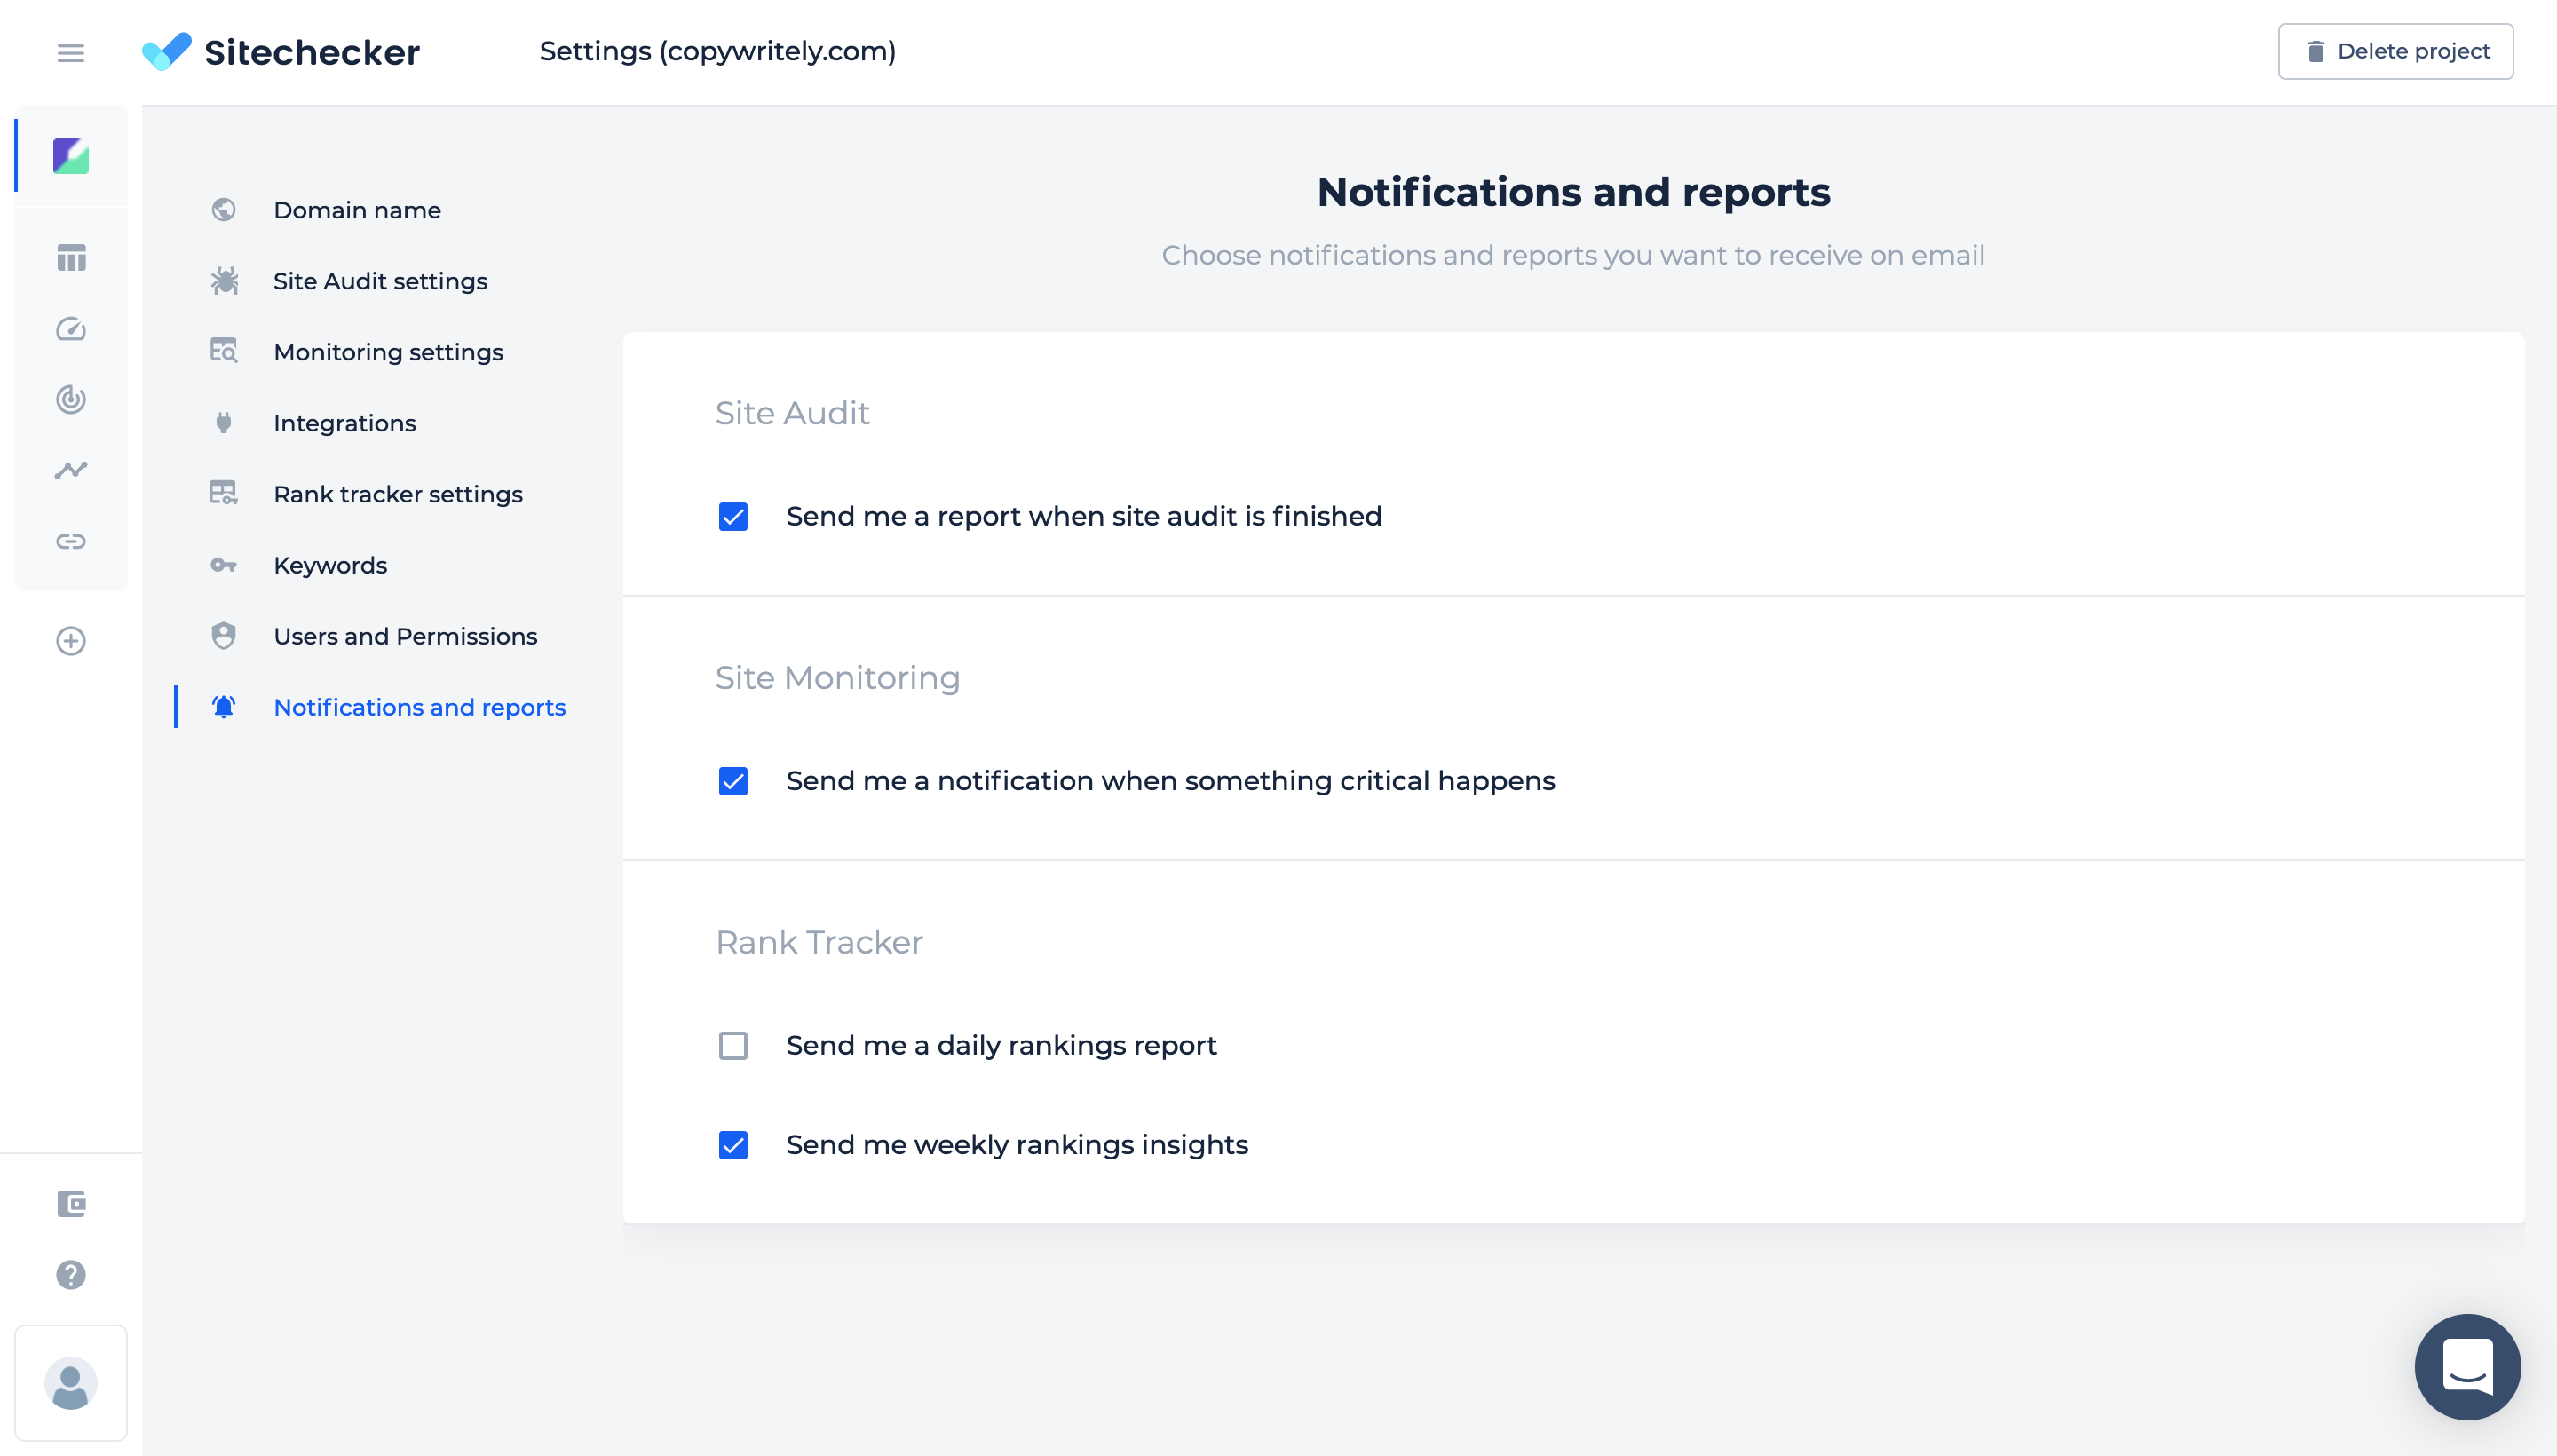 manage project notifications and reports